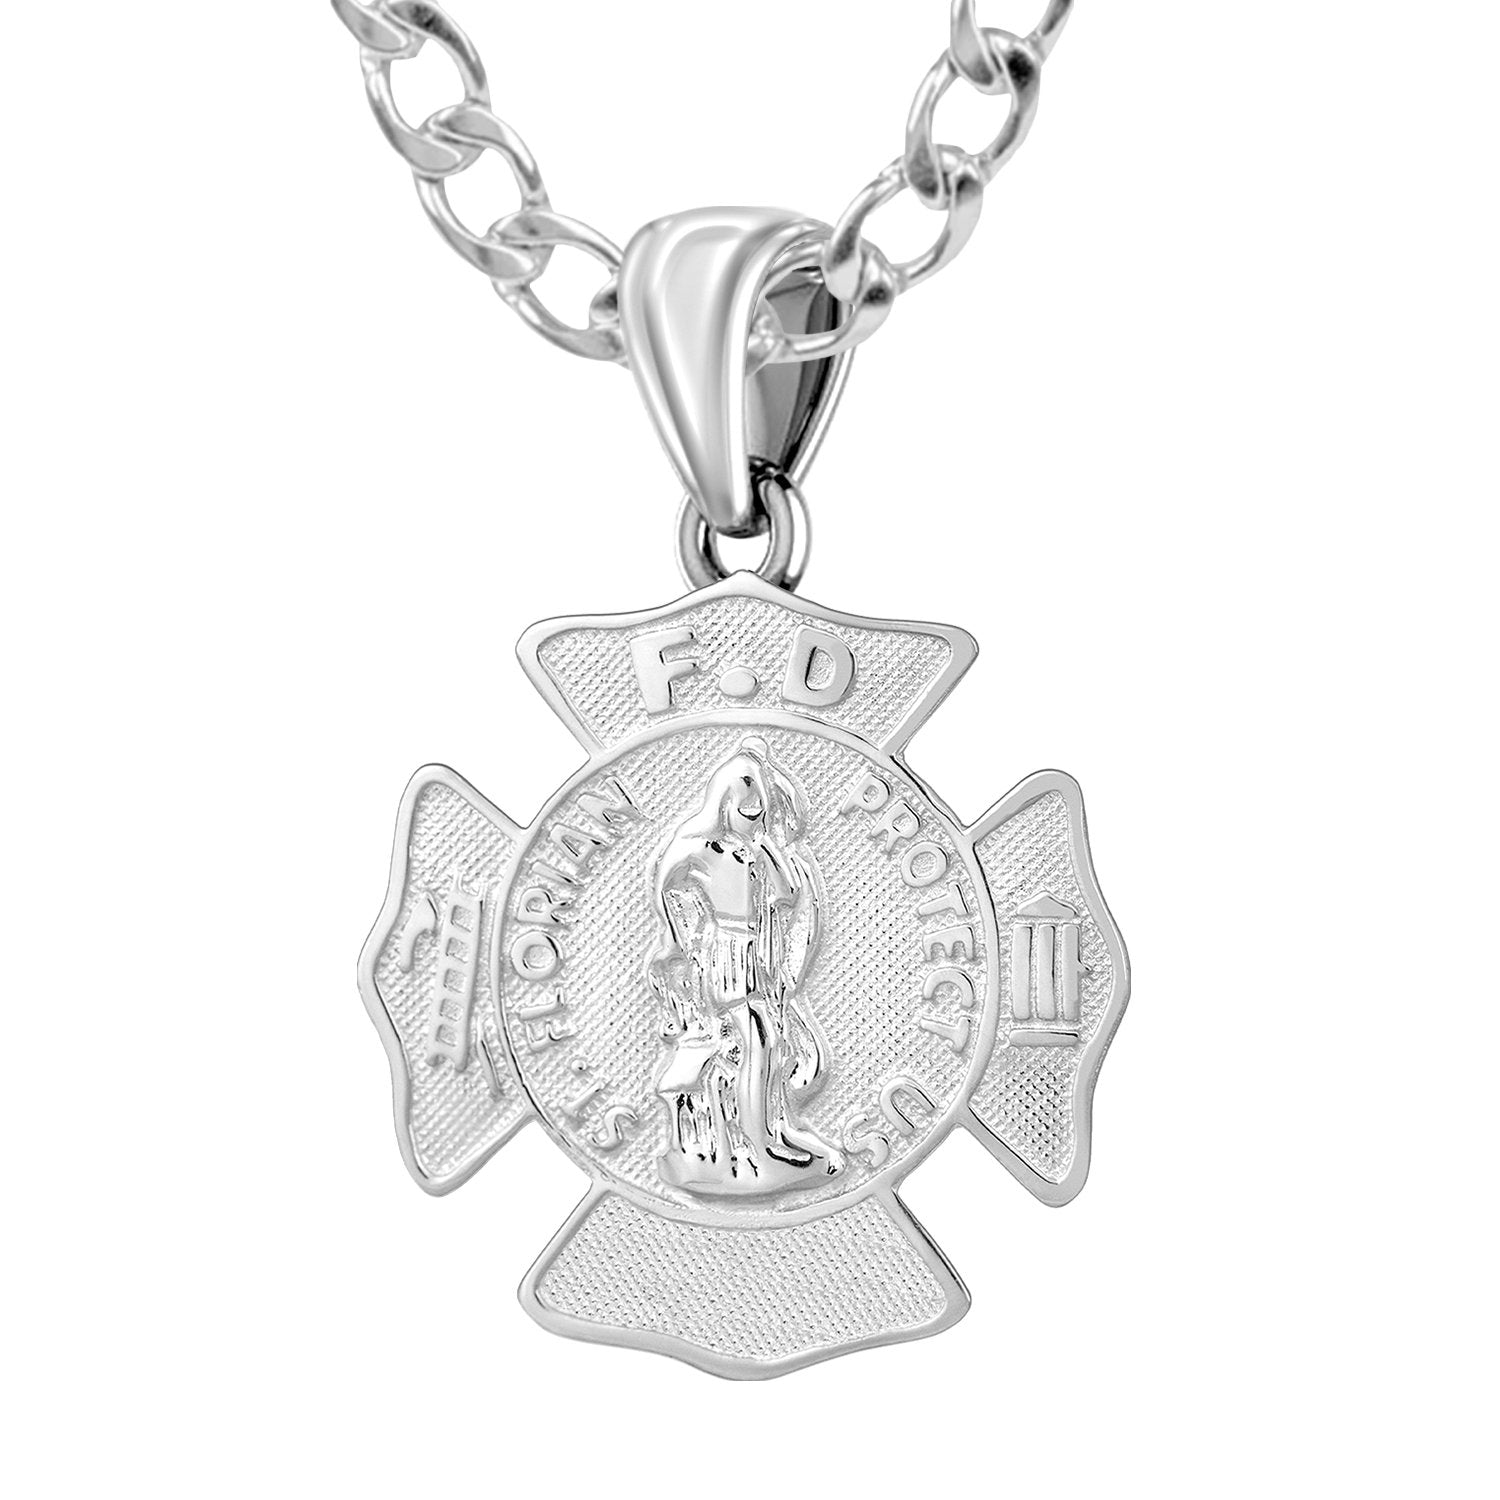 Firefighter Pendant In 925 Silver - 4mm Curb Chain